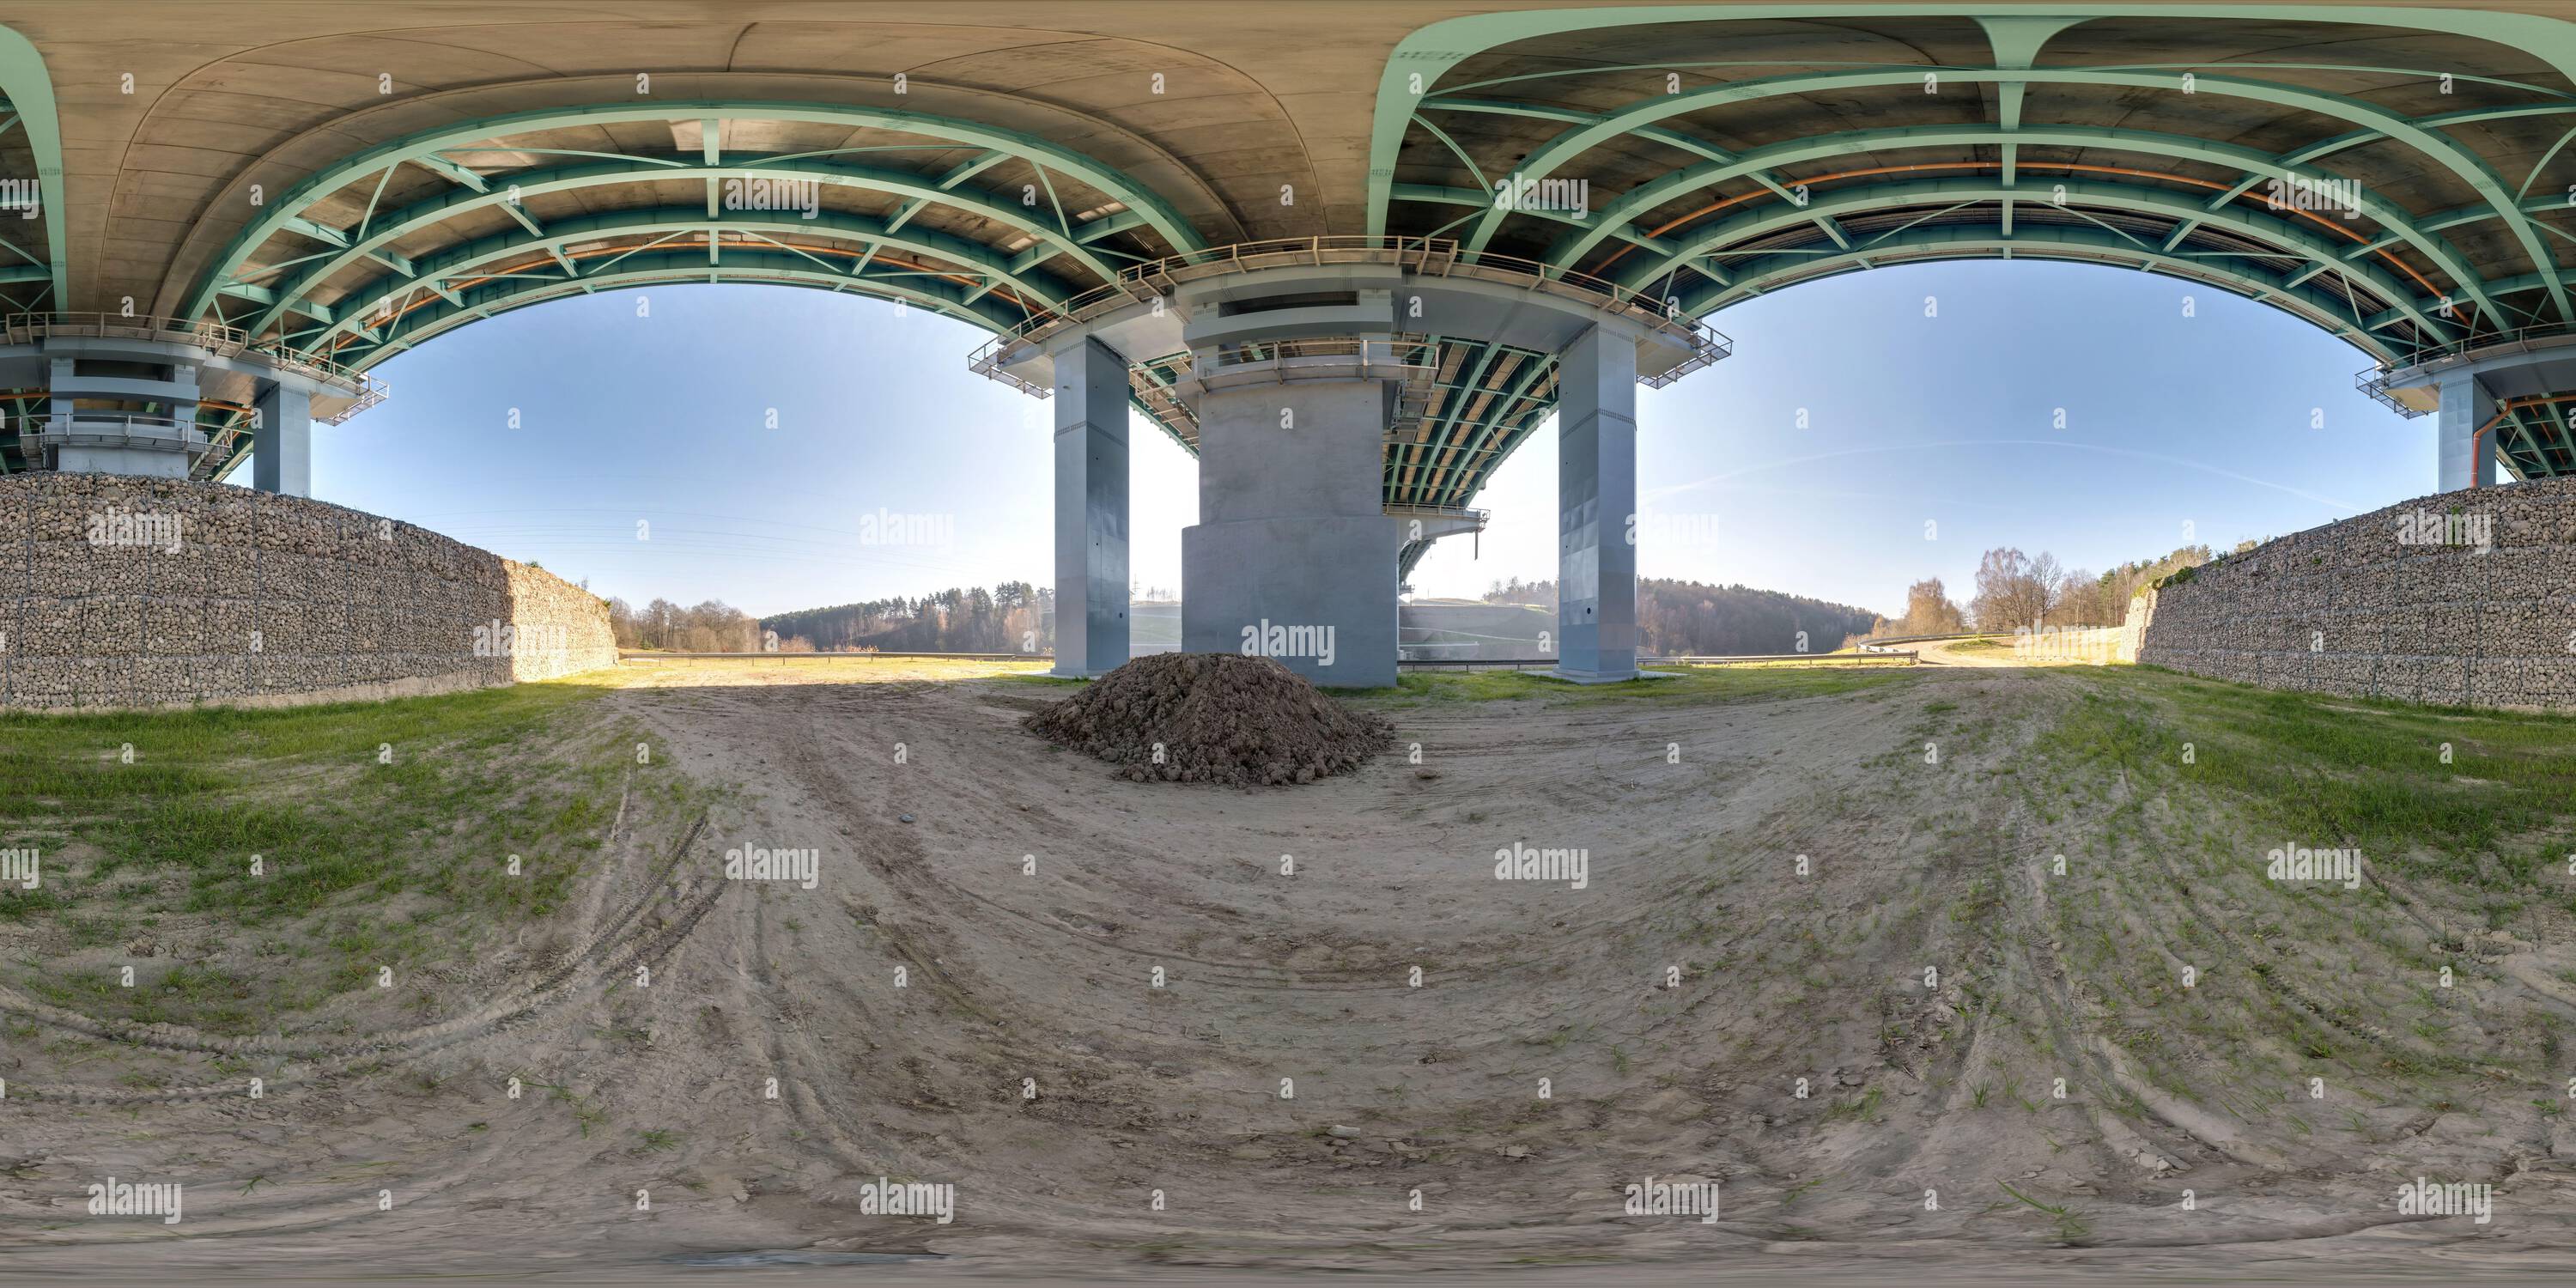 360 degree panoramic view of full hdri 360 panorama under steel frame construction of huge car bridge across river in seamless spherical equirectangular projection. VR  AR content